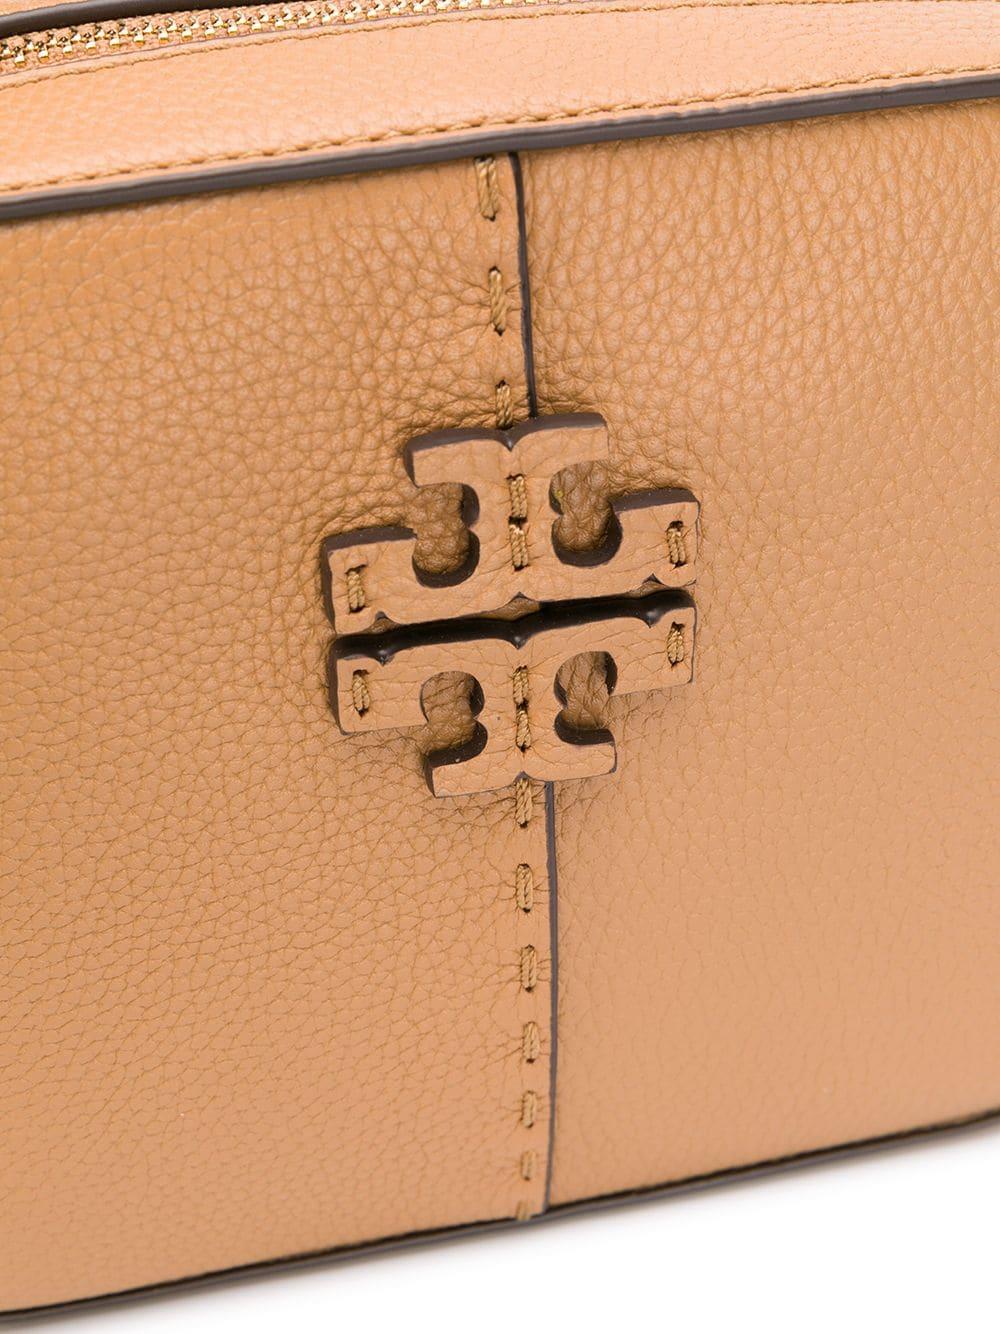 Tory Burch Mcgraw Camera Bag In Camel Color Leather in Natural